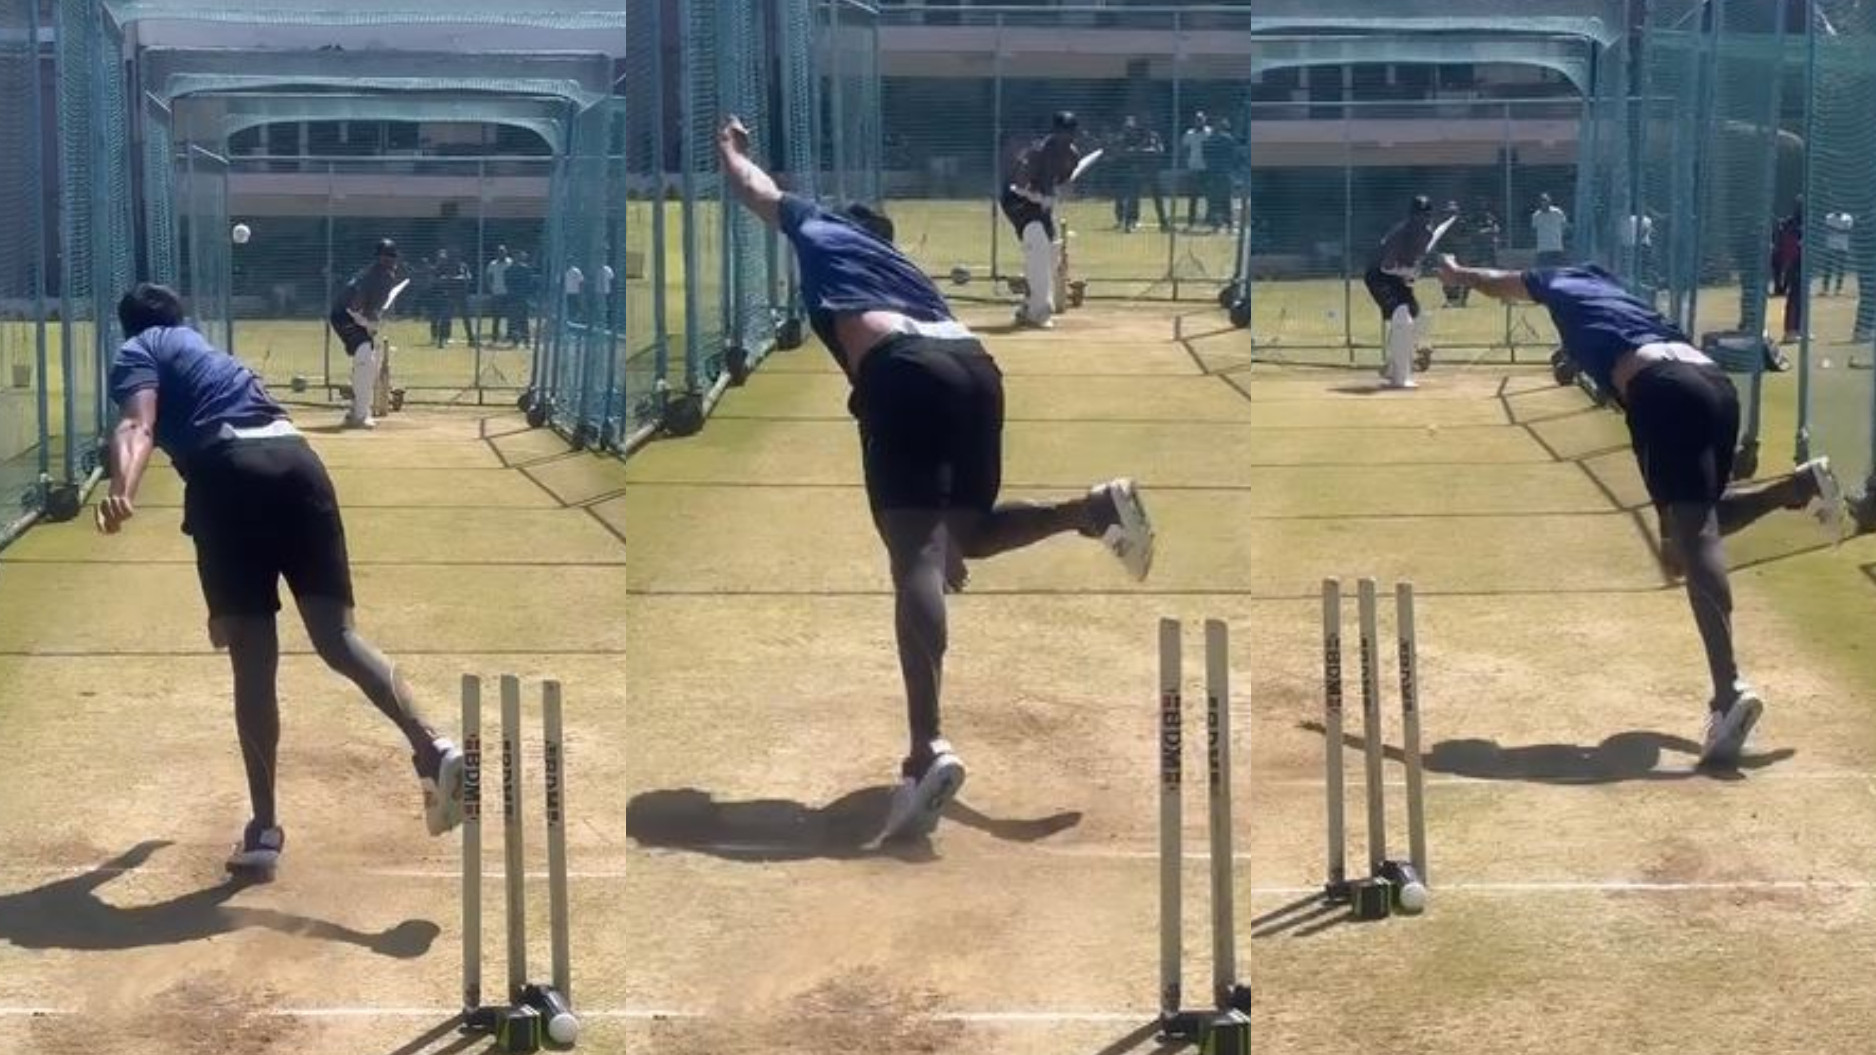 WATCH- Jasprit Bumrah resumes bowling in nets, raises hopes of playing in Tests against Australia